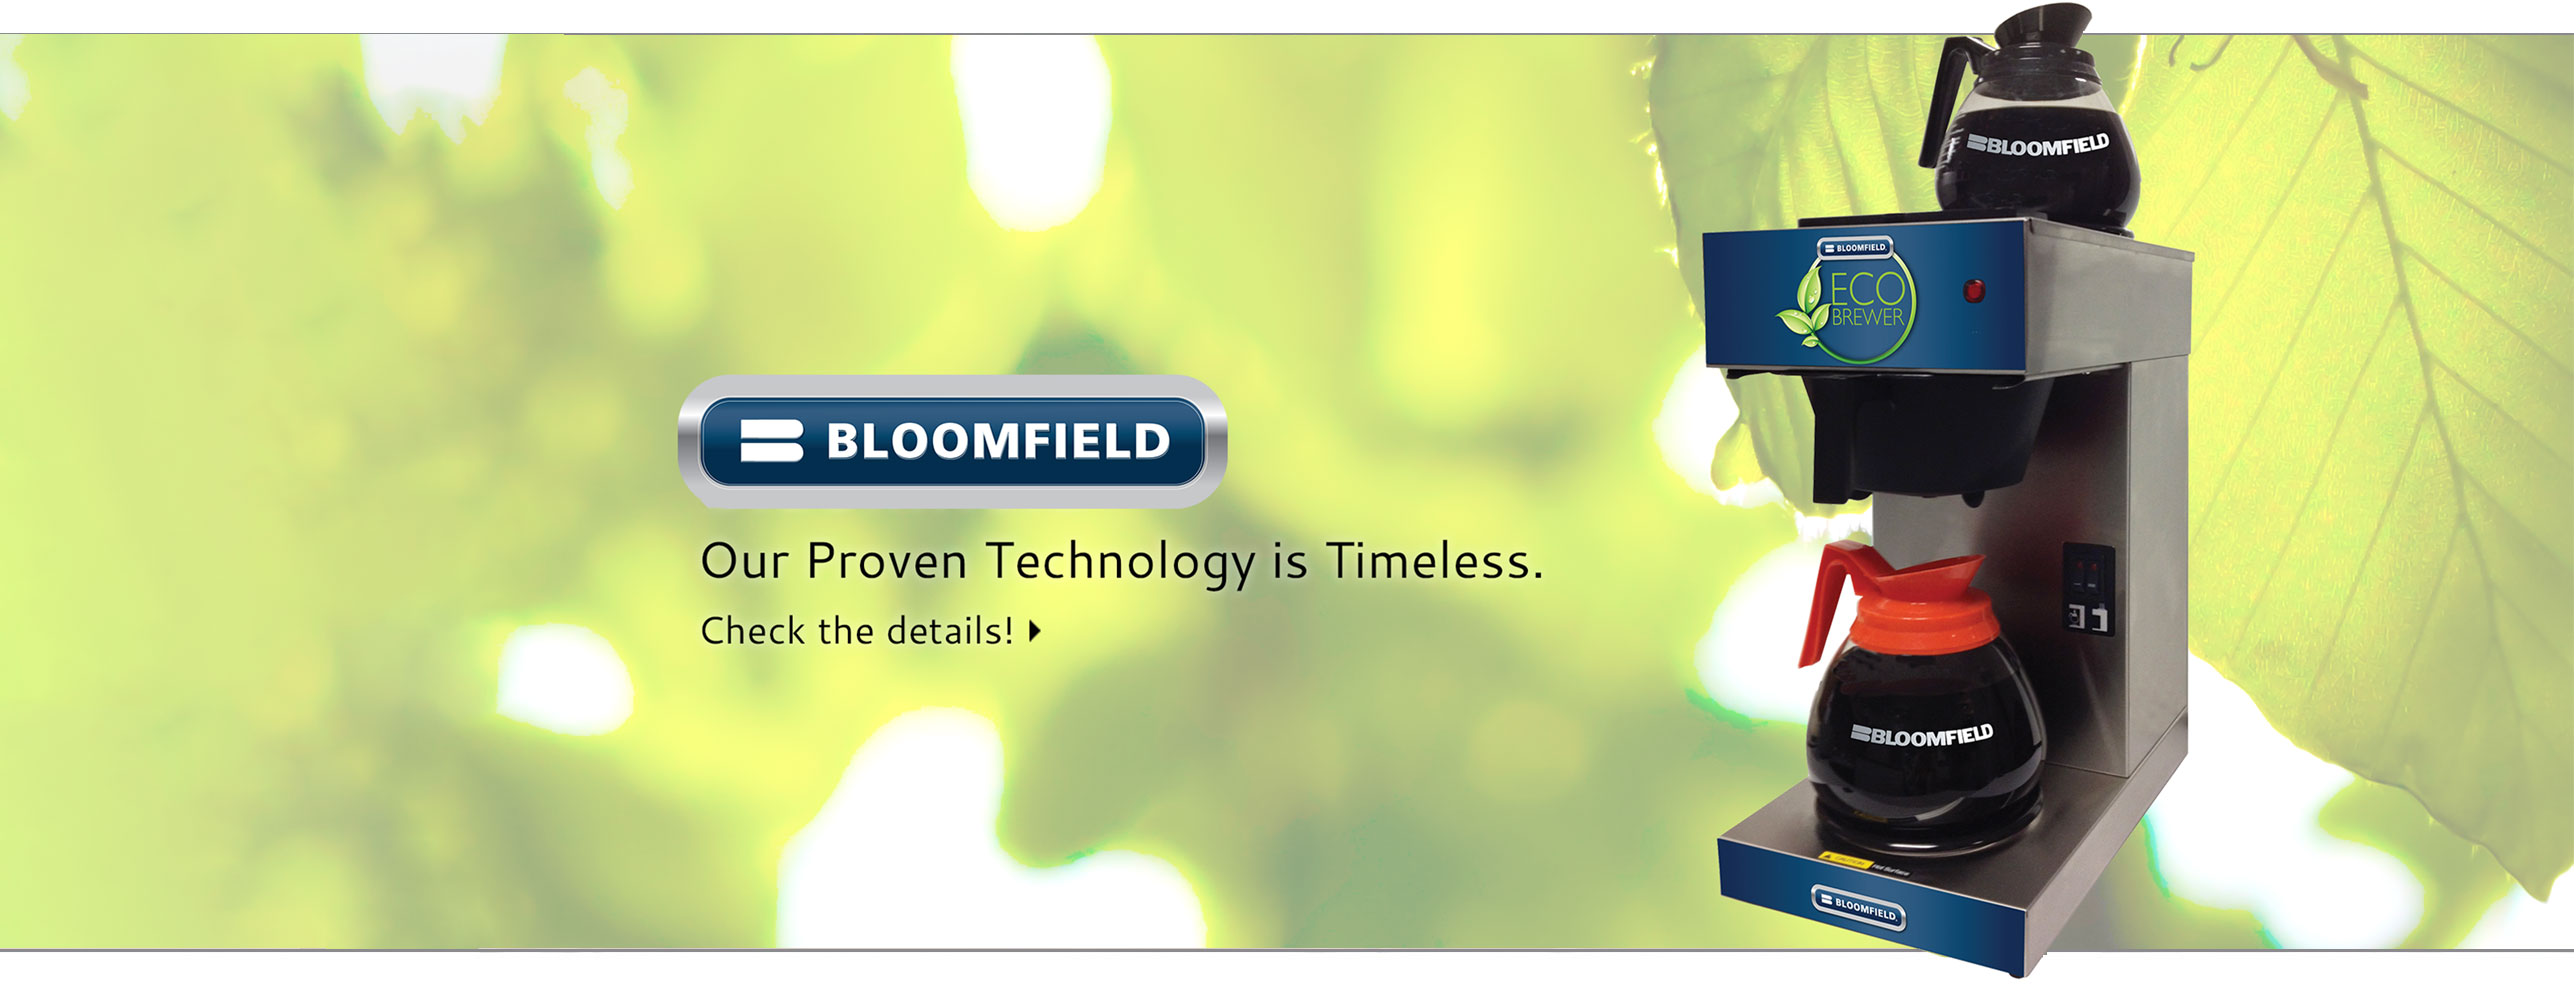 Bloomfield
Our Proven Technology is Timeless